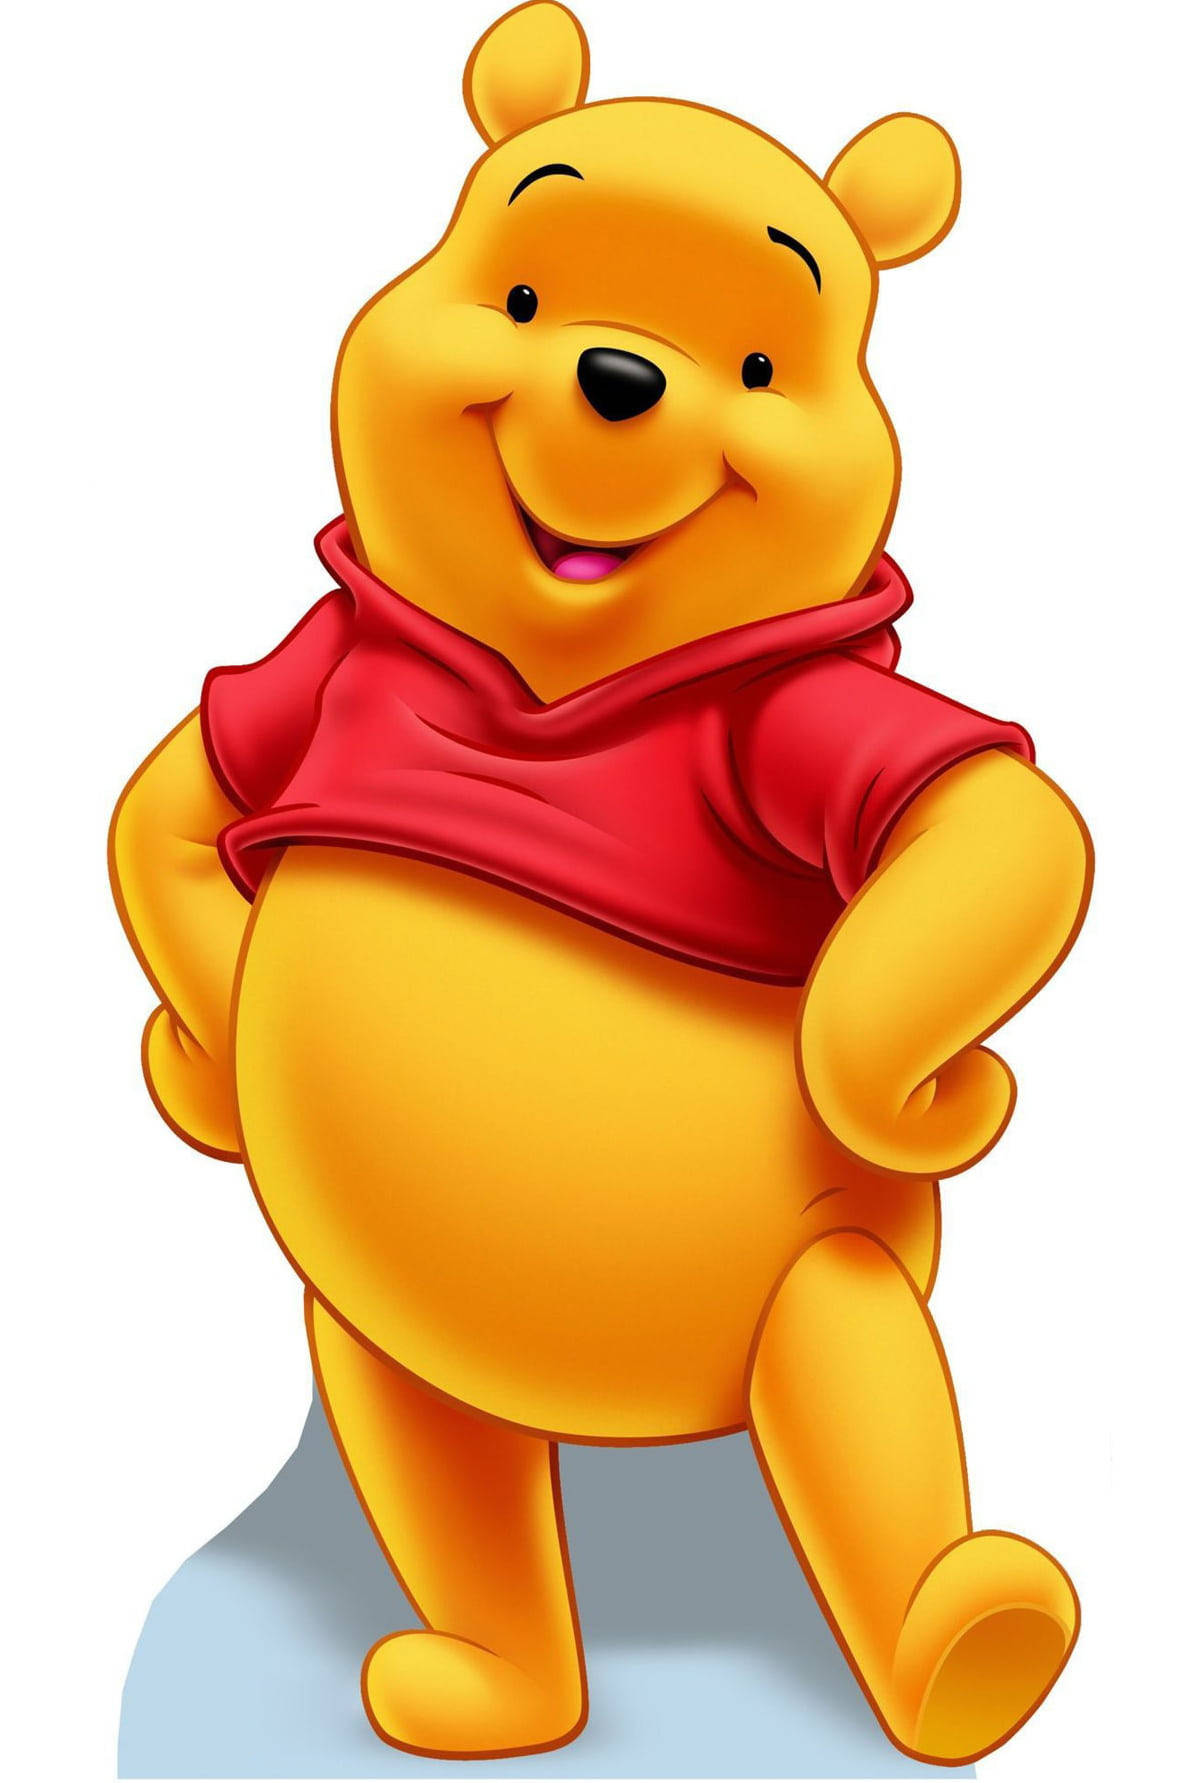 Cute Winnie The Pooh Iphone Happy White Background Wallpaper